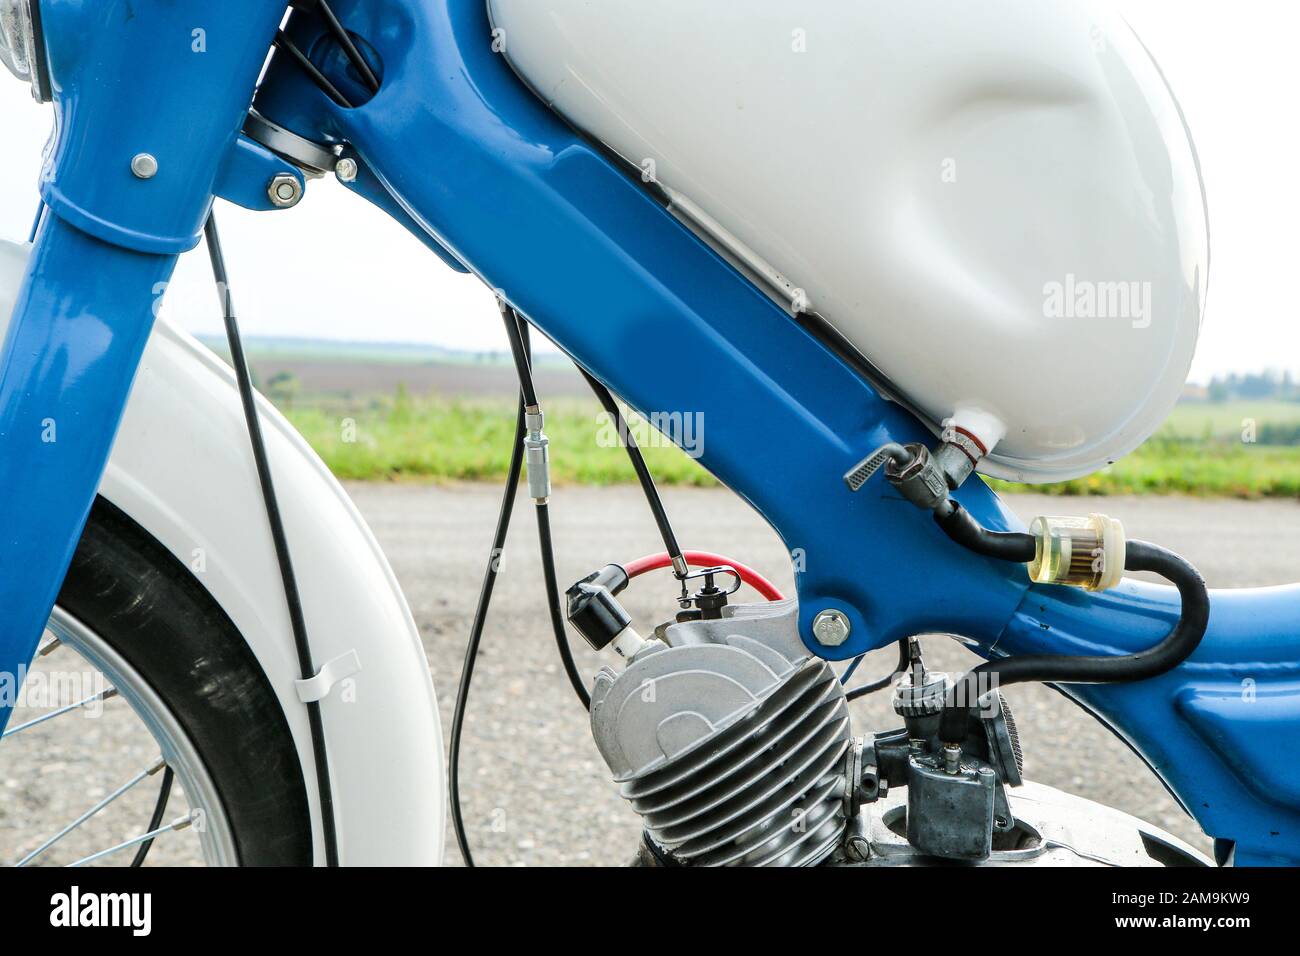 The detail of the old light motorcycle or moped with part of the engine, fuel tank and fuel lead. Stock Photo